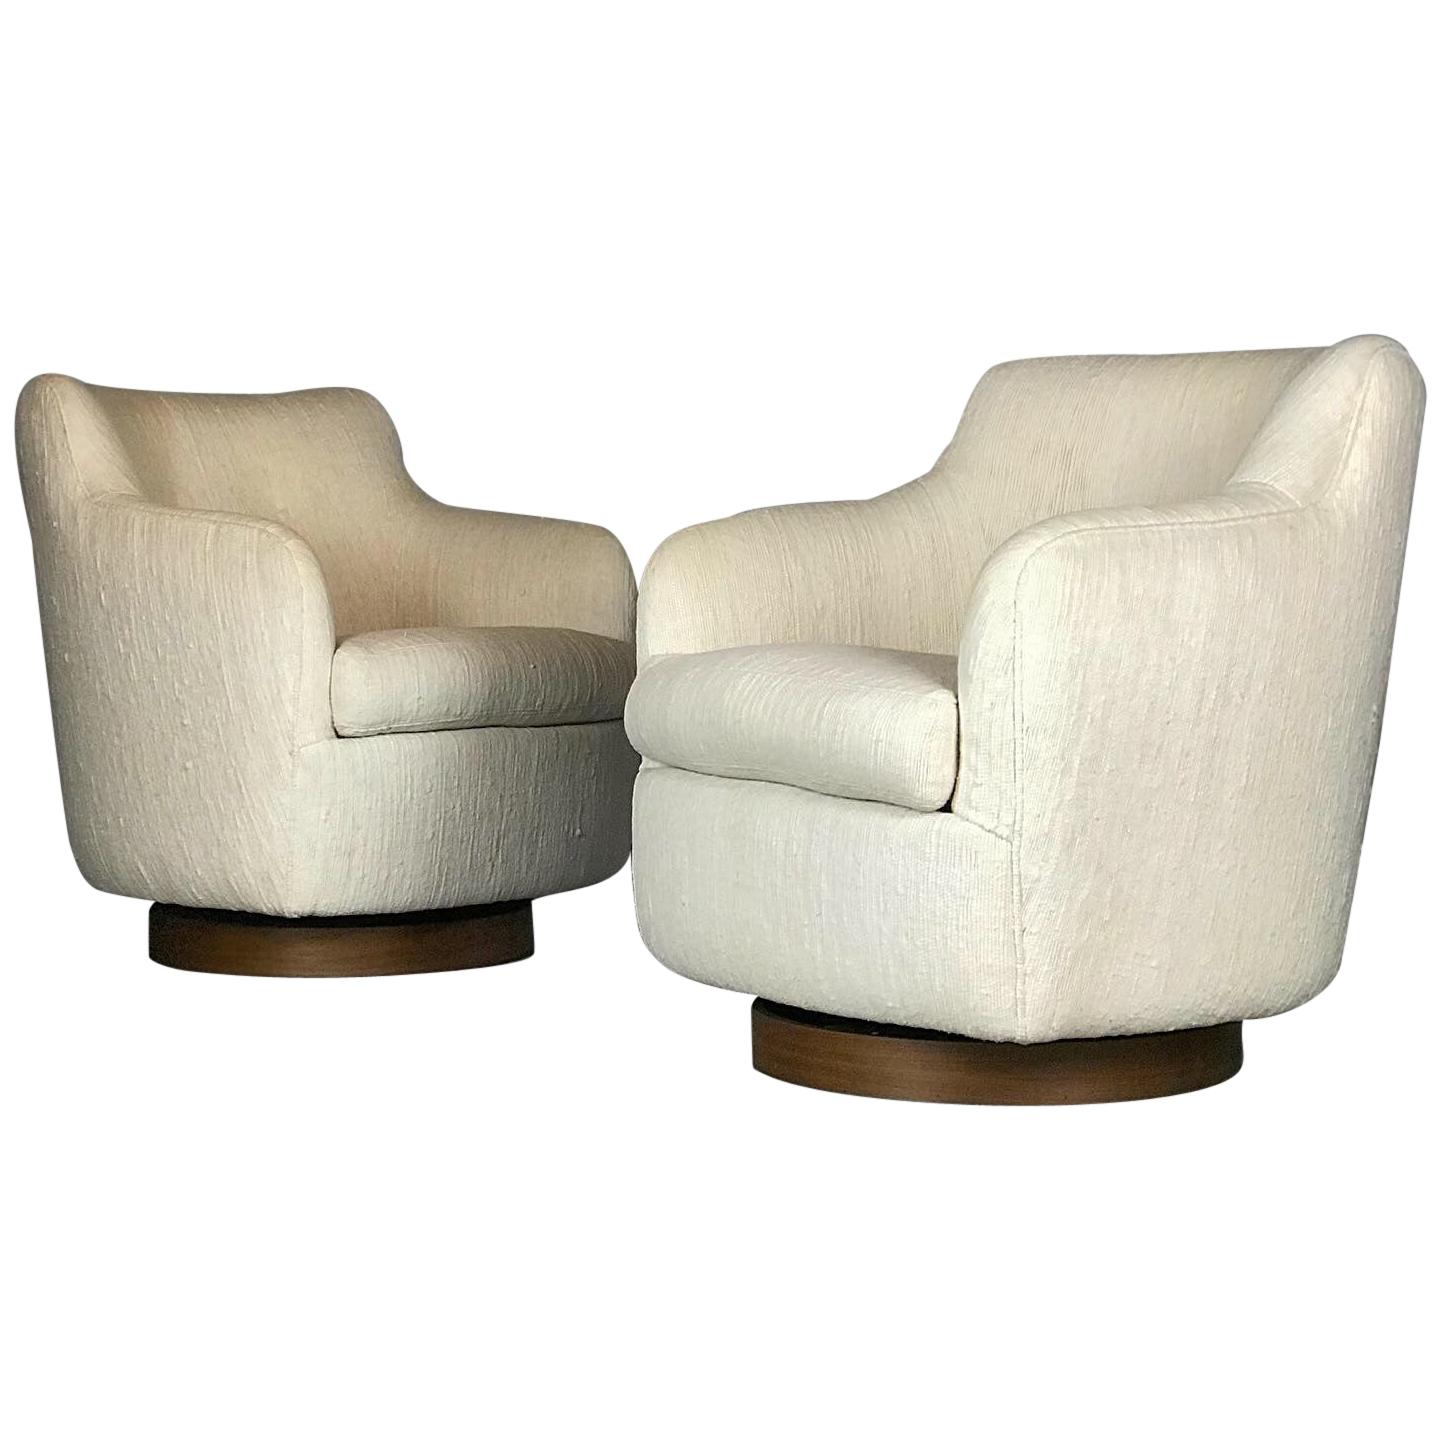 Designer Swivel and Tilt Lounge Chairs by Milo Baughman for Thayer Coggin